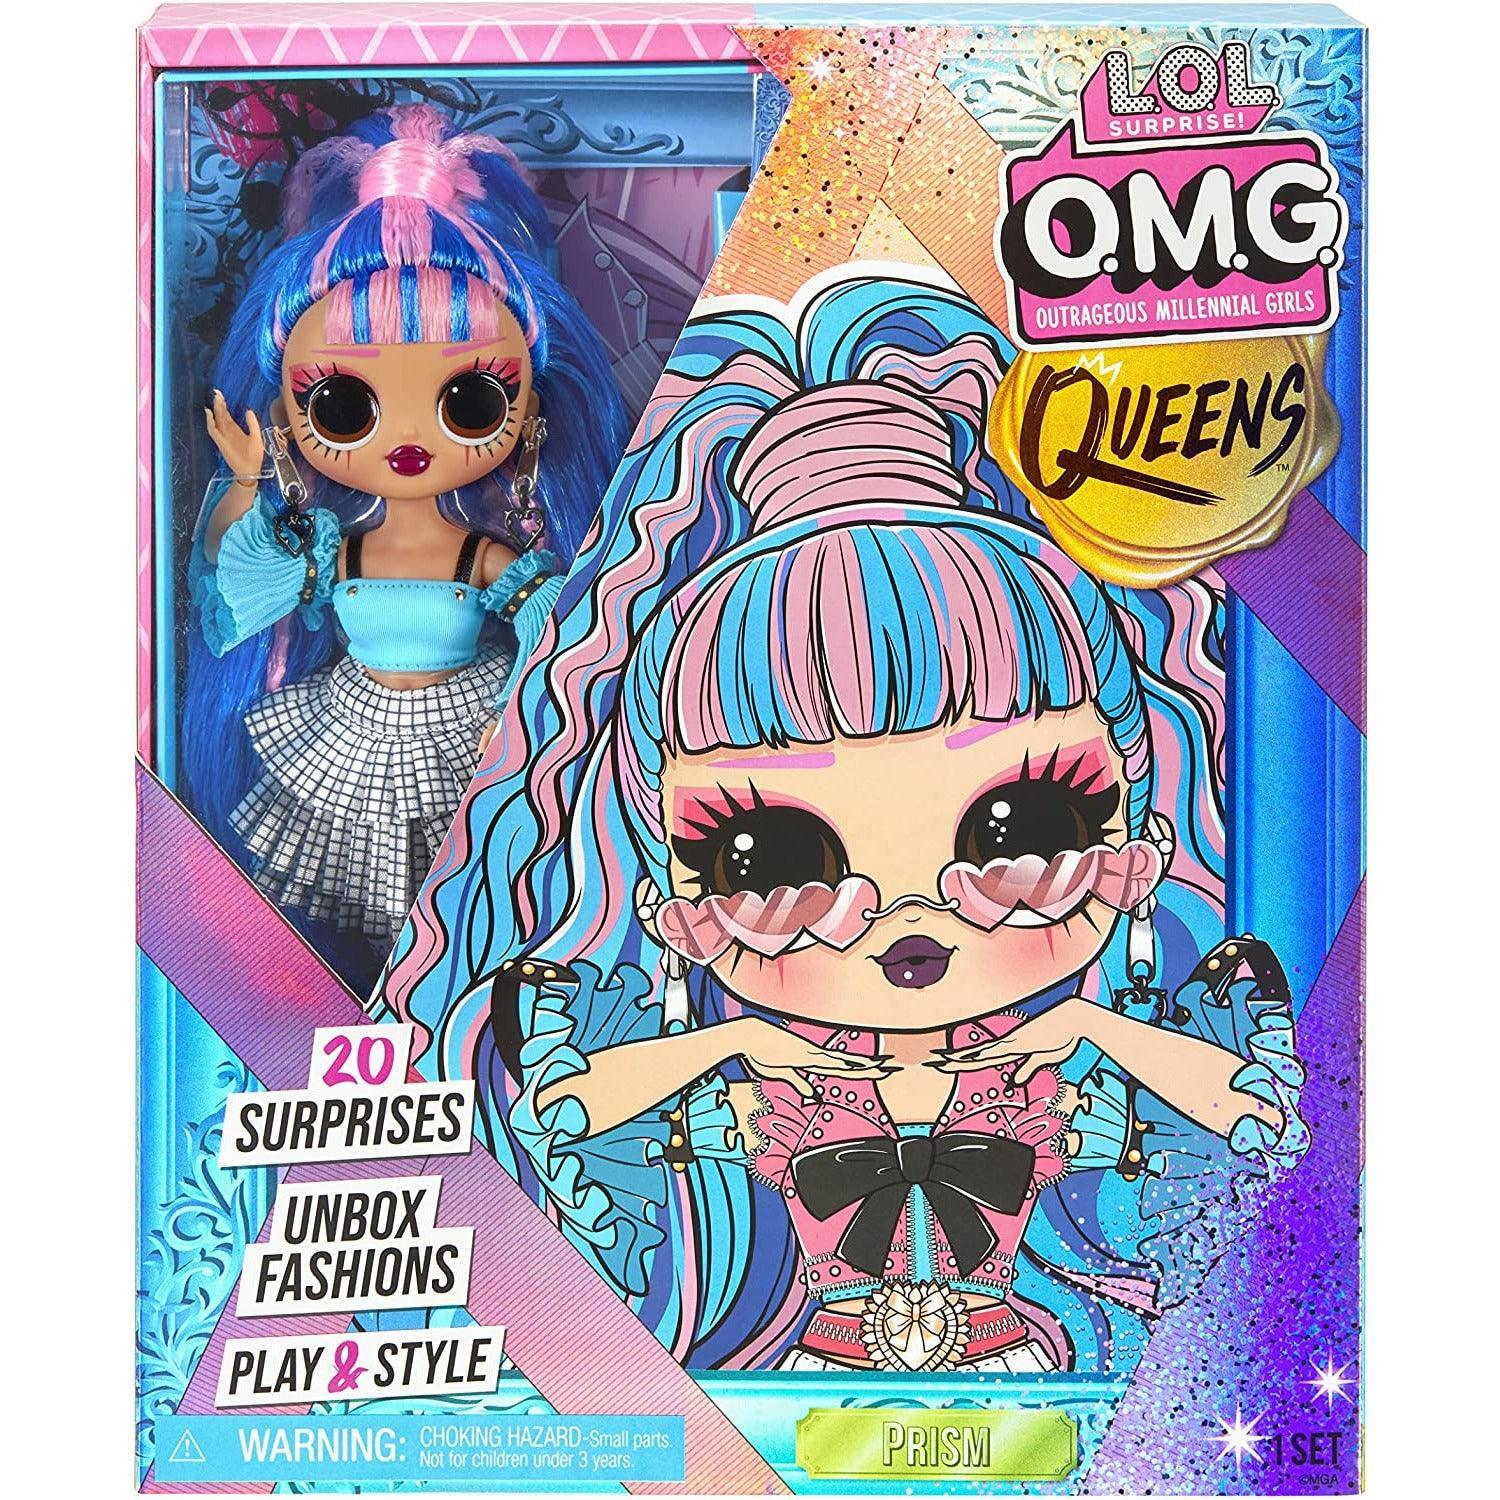 LOL Surprise OMG Queens Queens Prism Fashion Doll with 20 Surprises Including Outfit and Accessories - BumbleToys - 5-7 Years, Dolls, Fashion Dolls & Accessories, Girls, L.O.L, OXE, Pre-Order